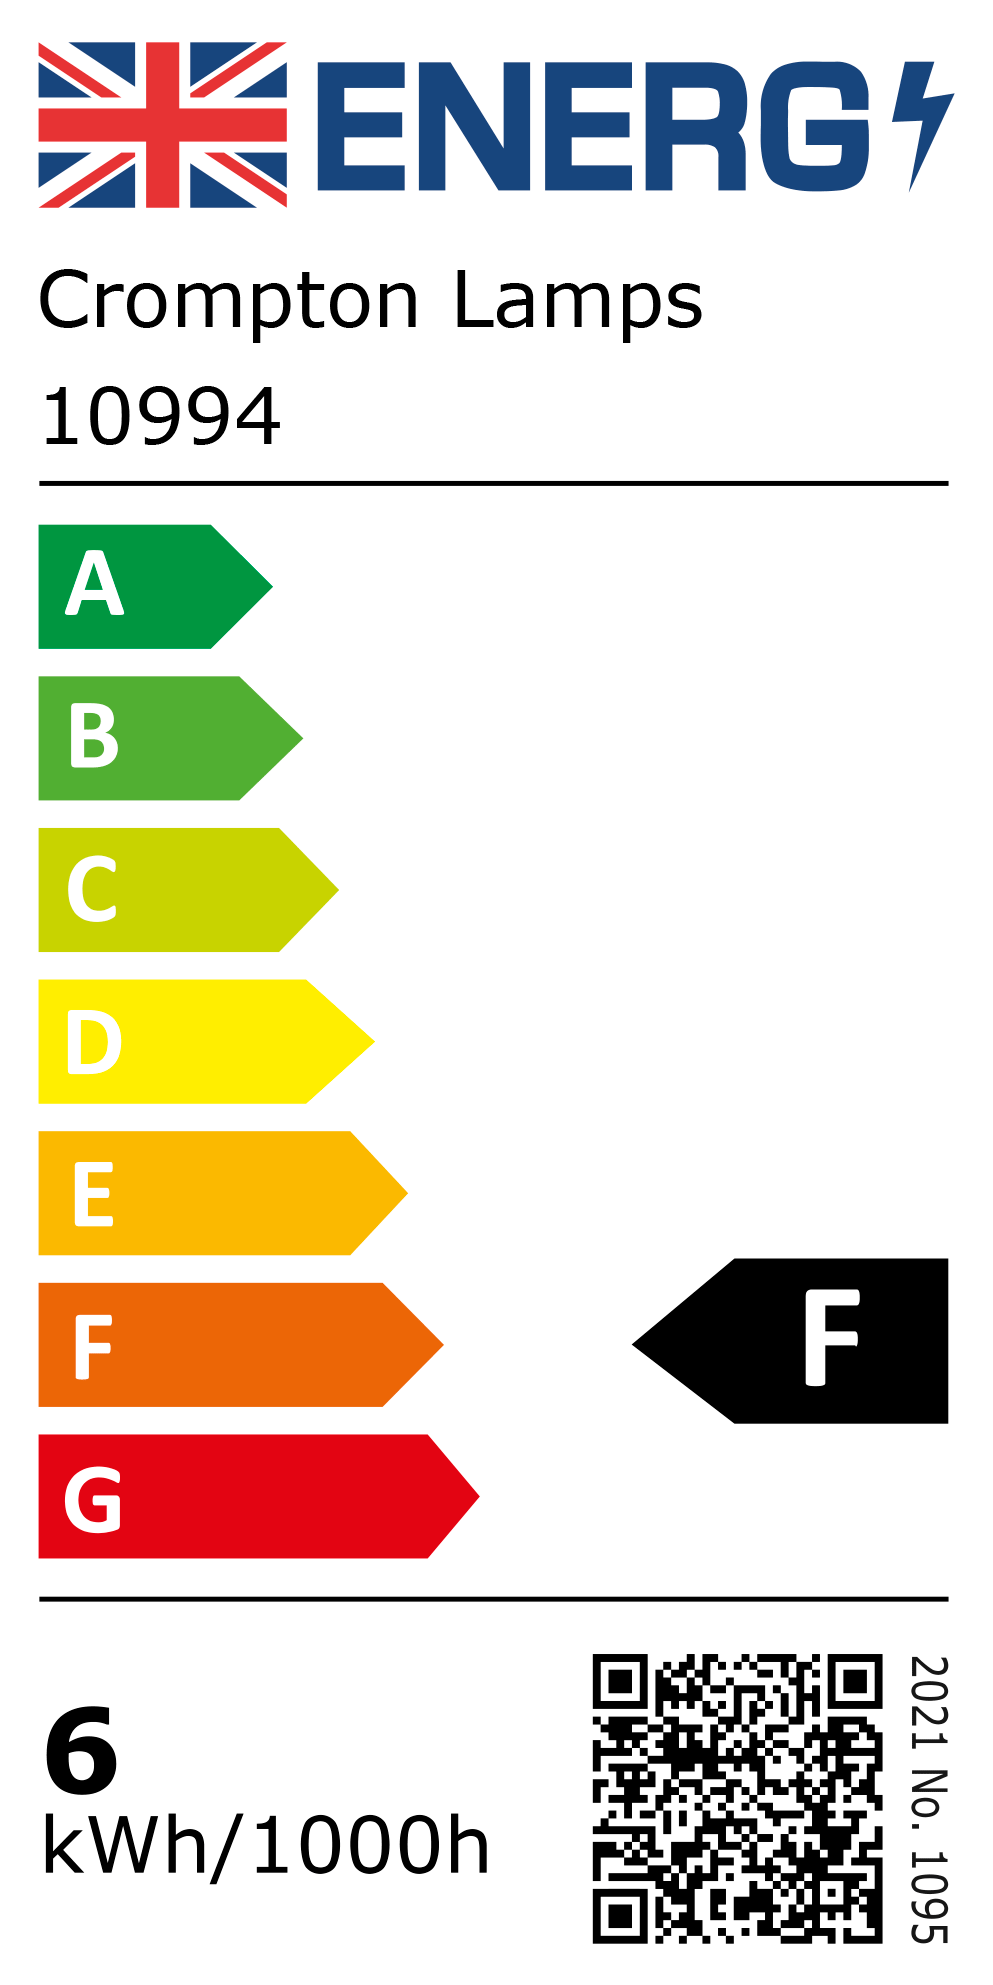 New 2021 Energy Rating Label: Stock Code 10994